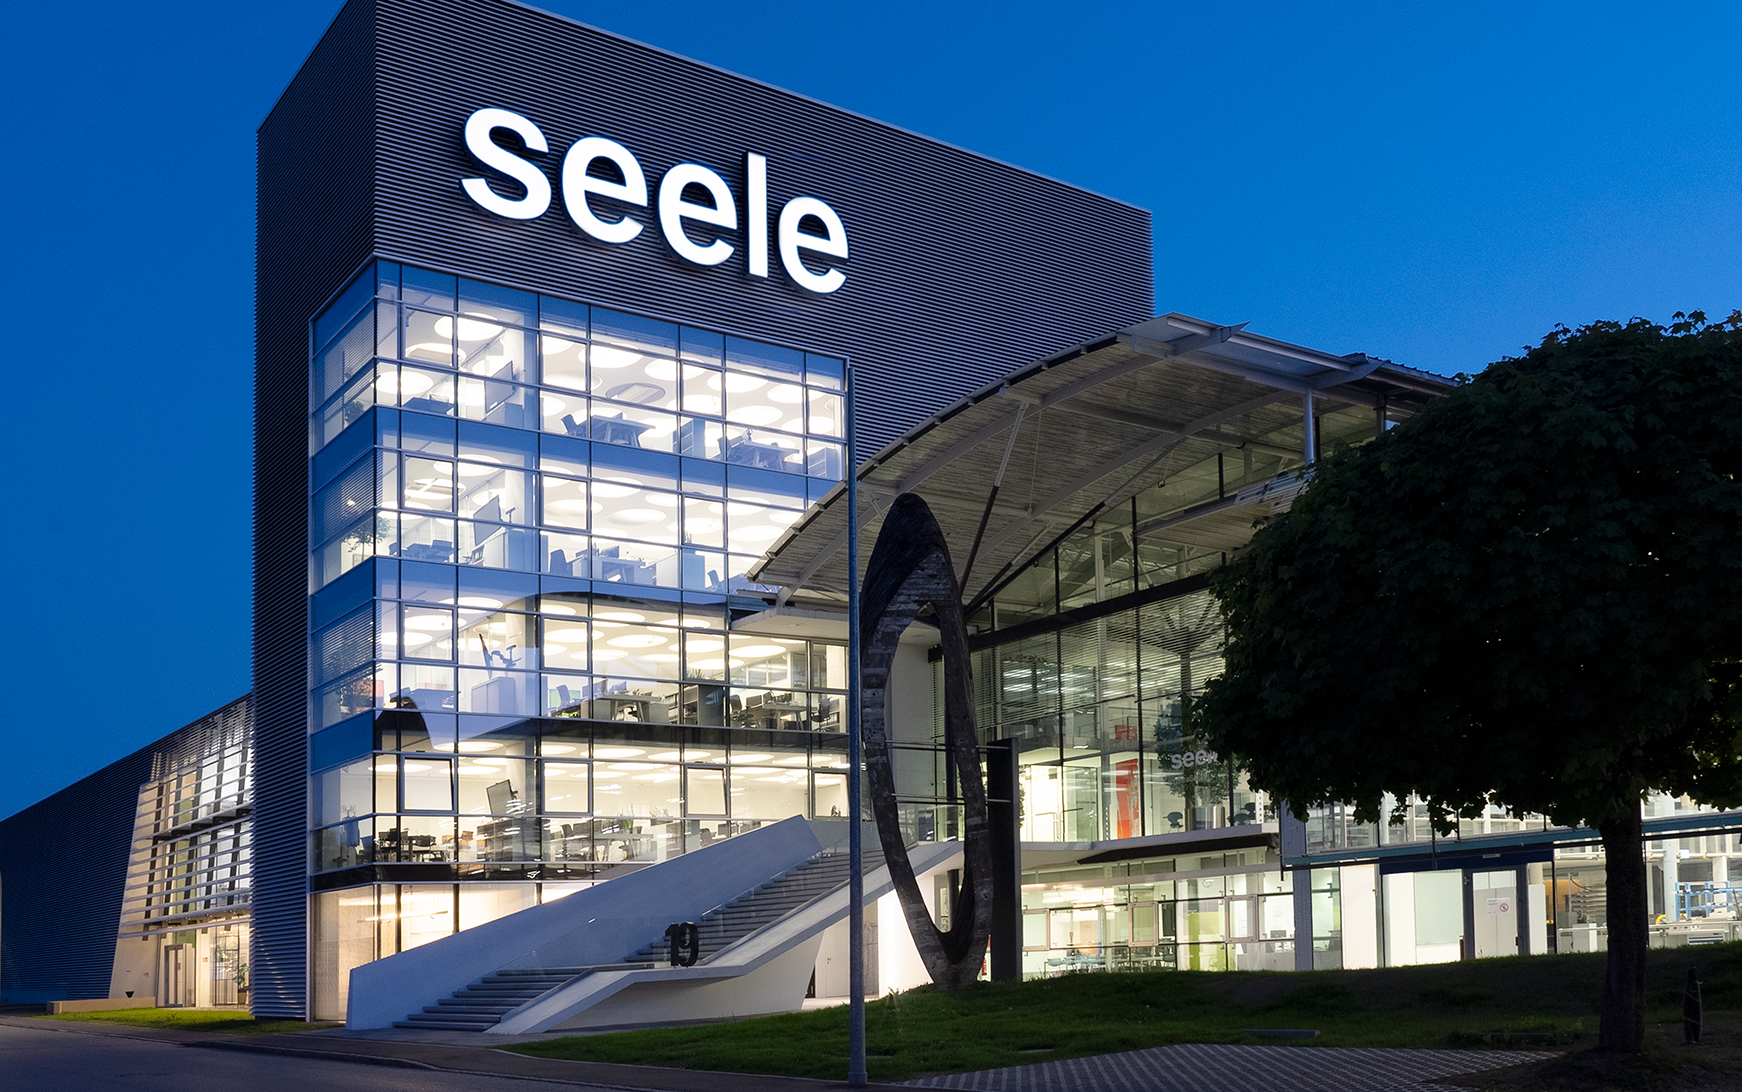 What awaits you at façade specialist seele is a dynamic and forward-looking workplace with an international approach.